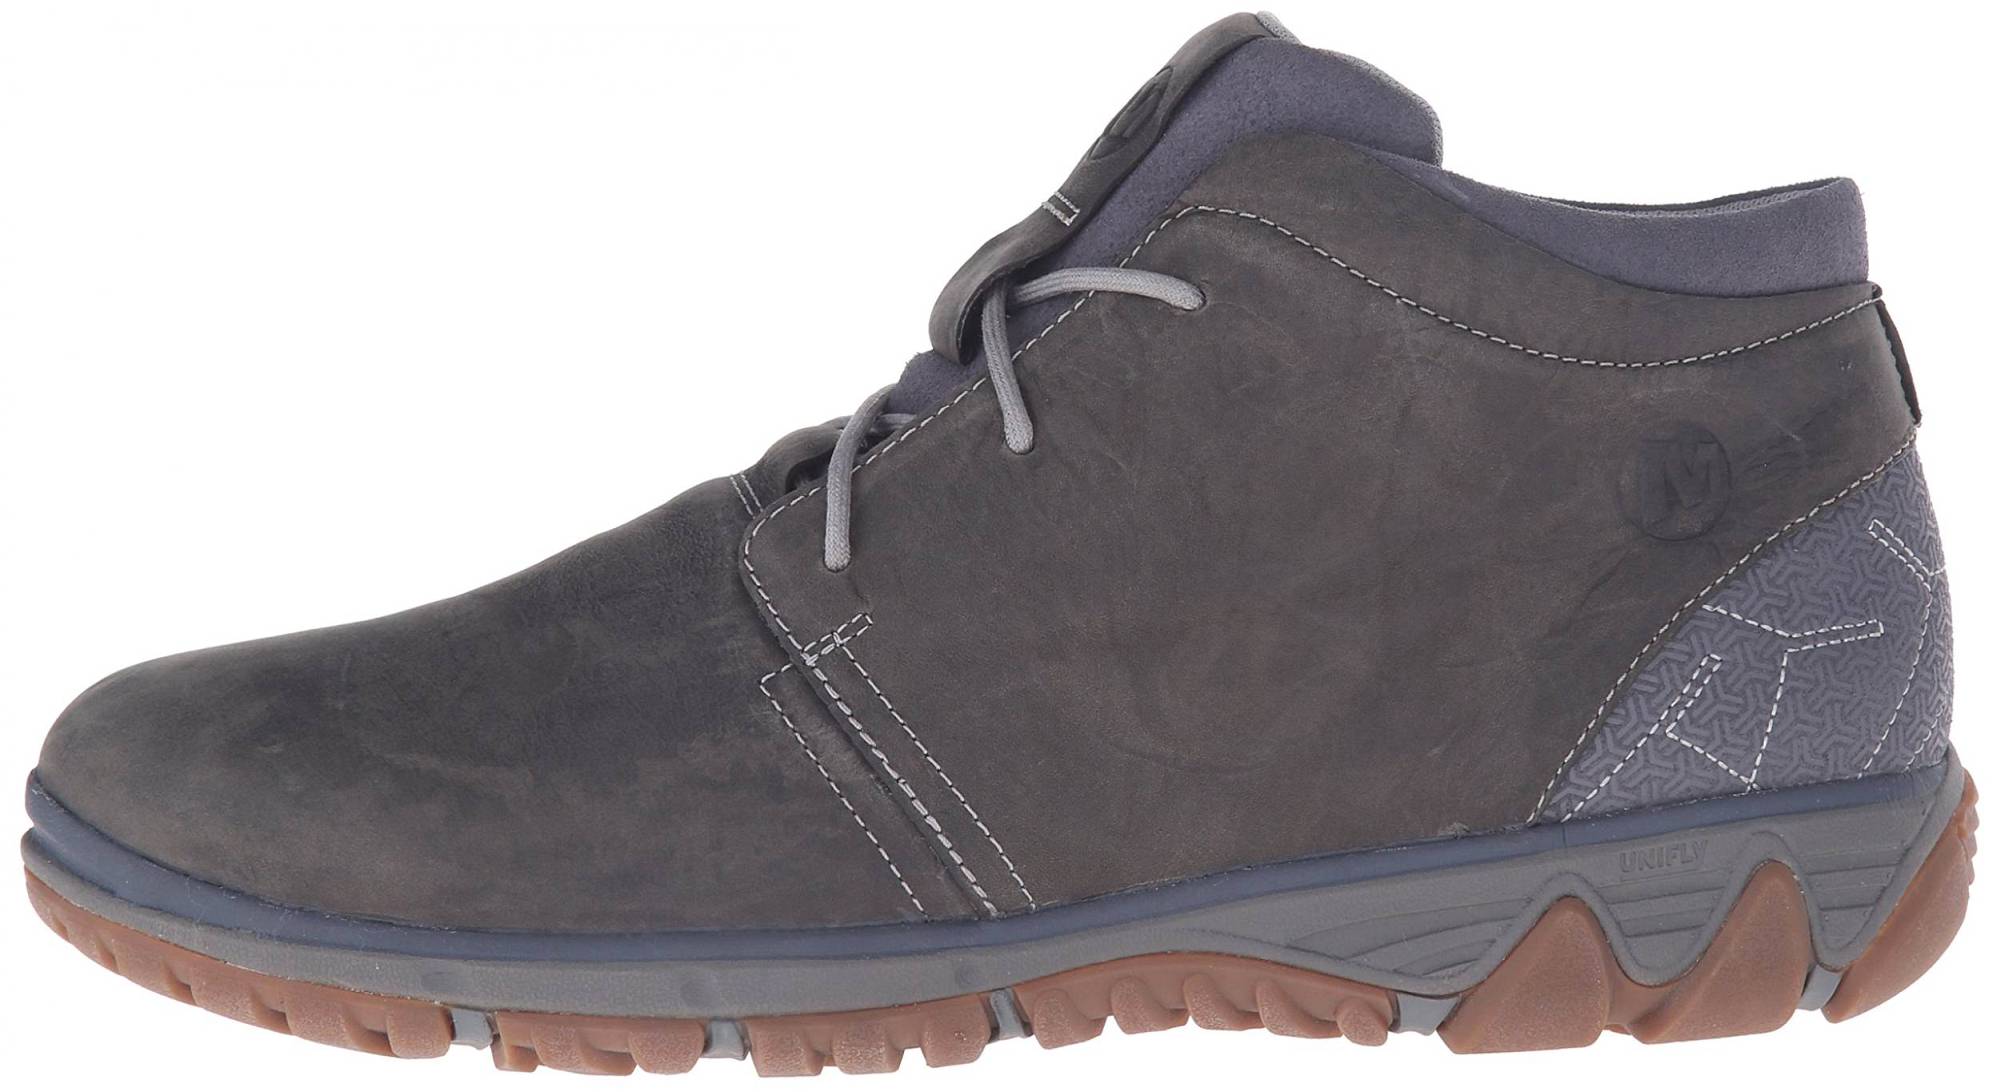 Merrell All Out Blazer Chukka – Shoes Reviews & Reasons To Buy